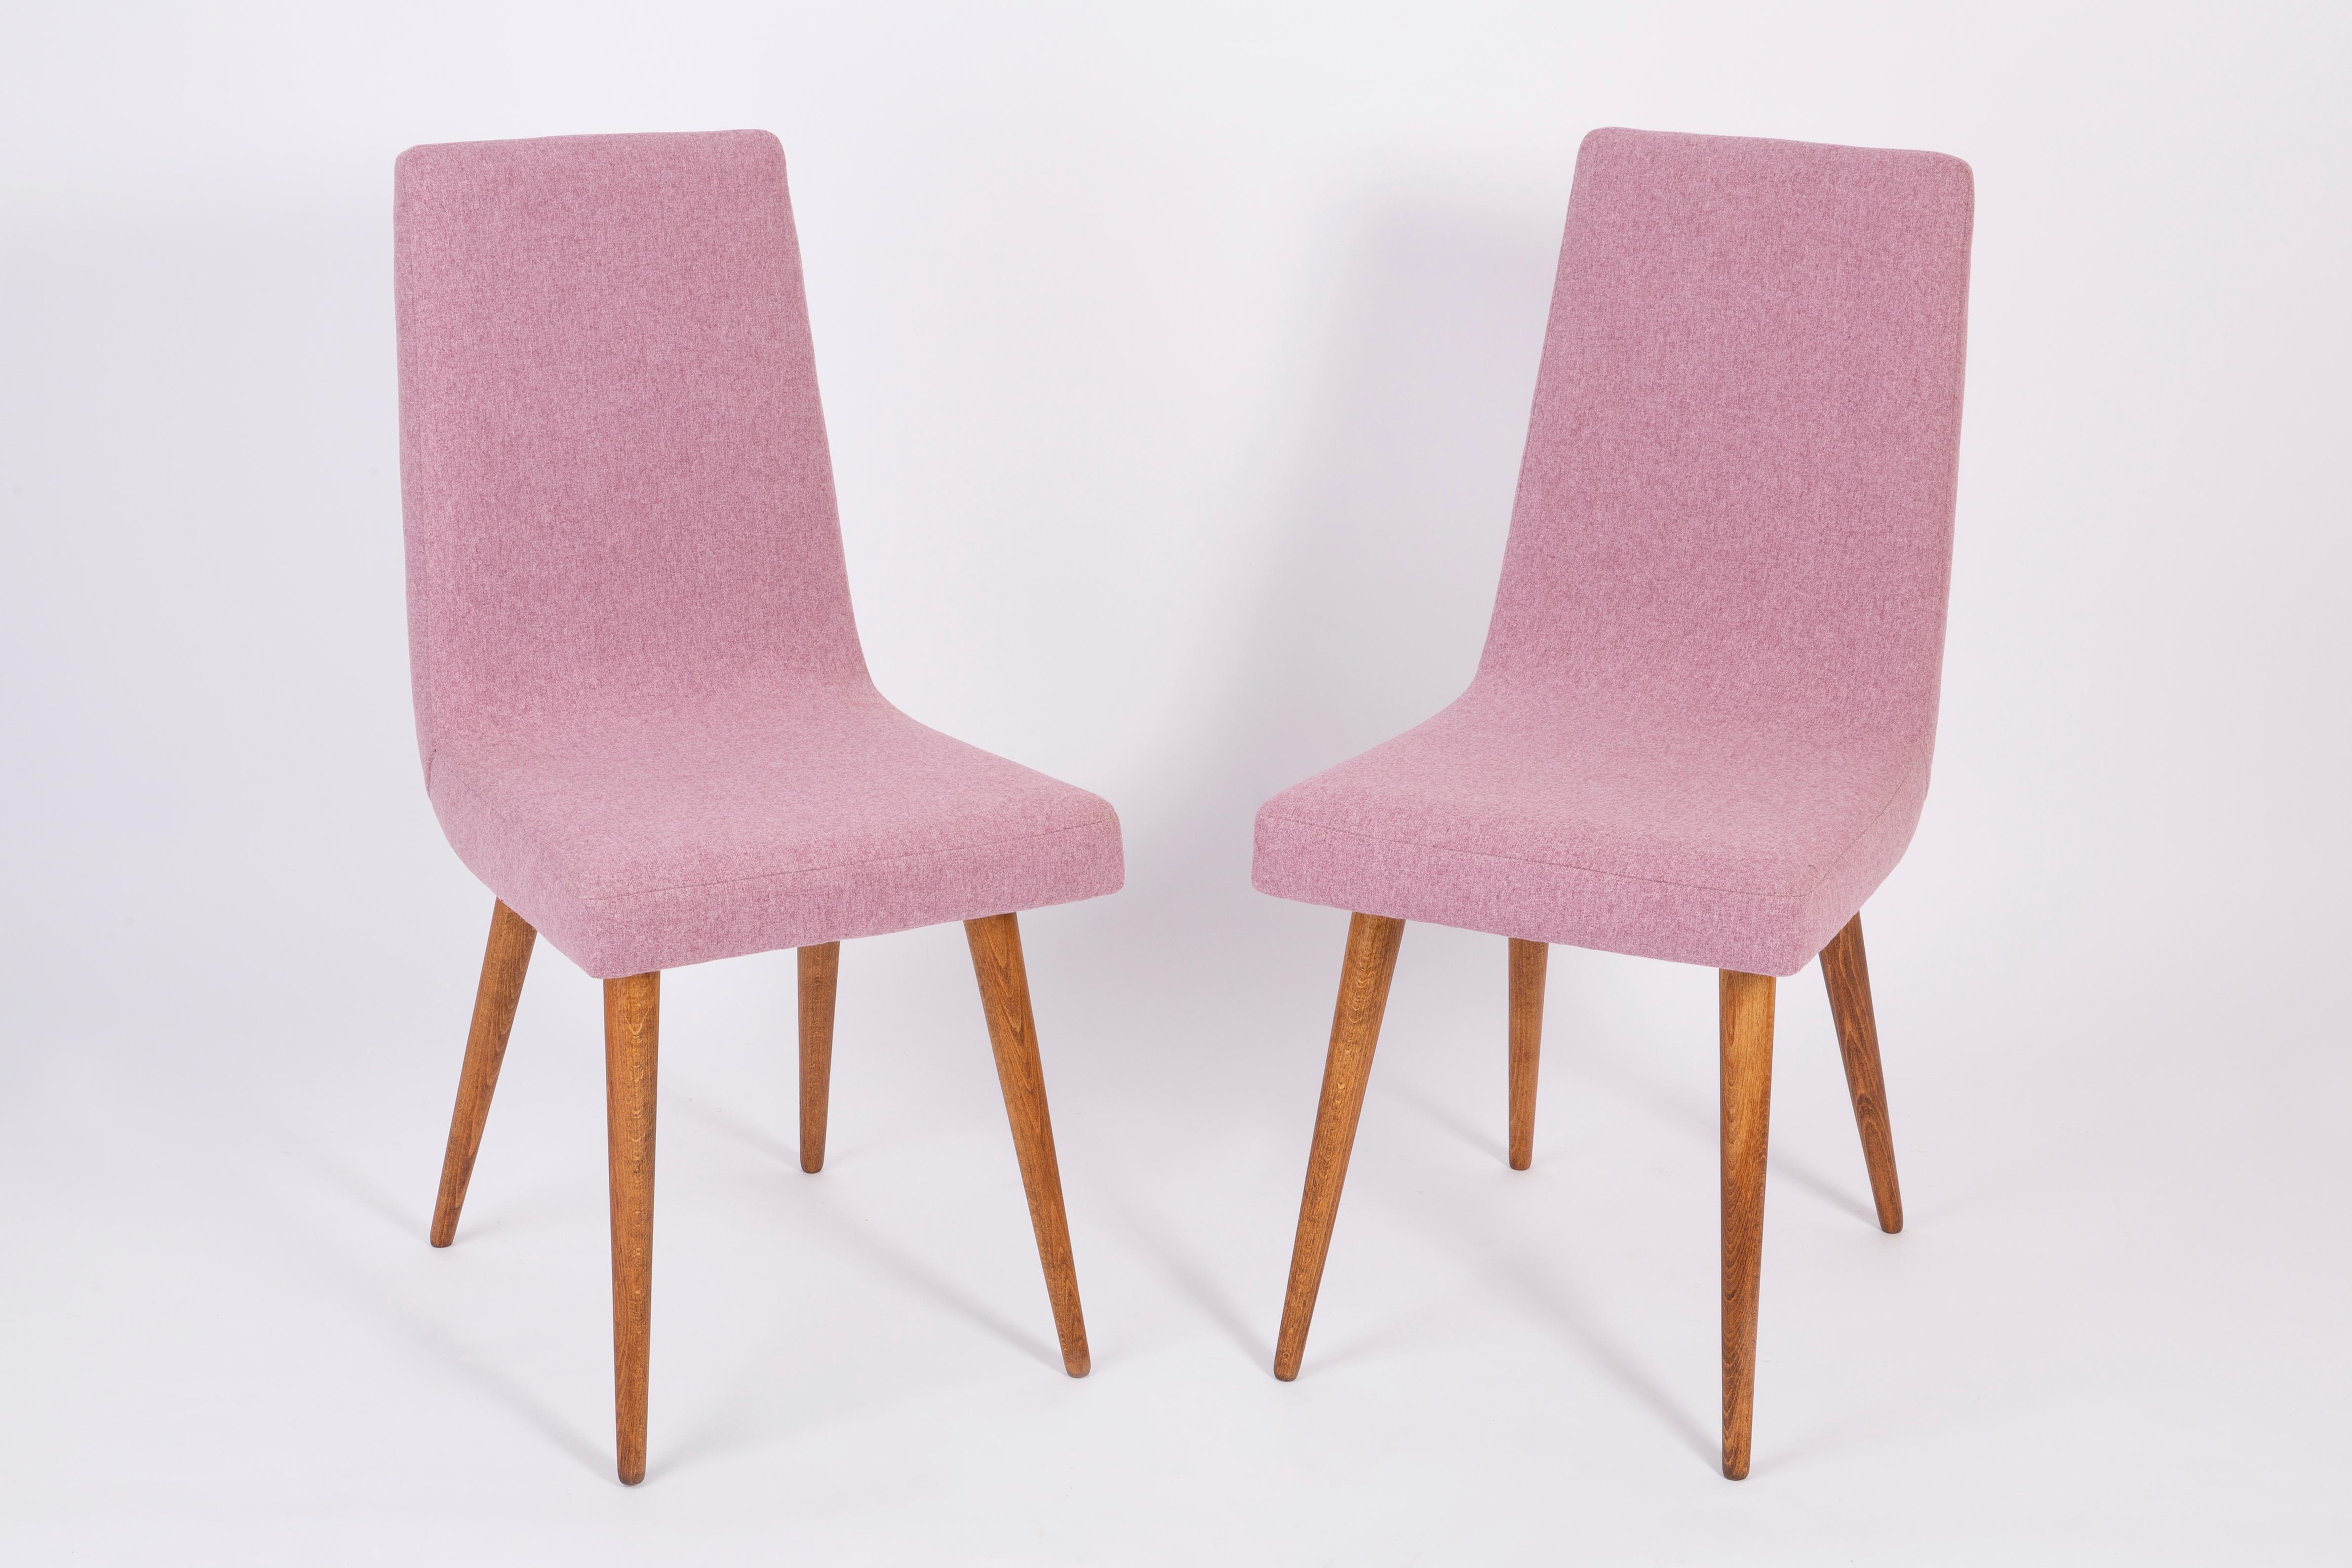 Metal Set of Four Mid-Century Vintage Pink Melange Chairs, Europe, 1960s For Sale